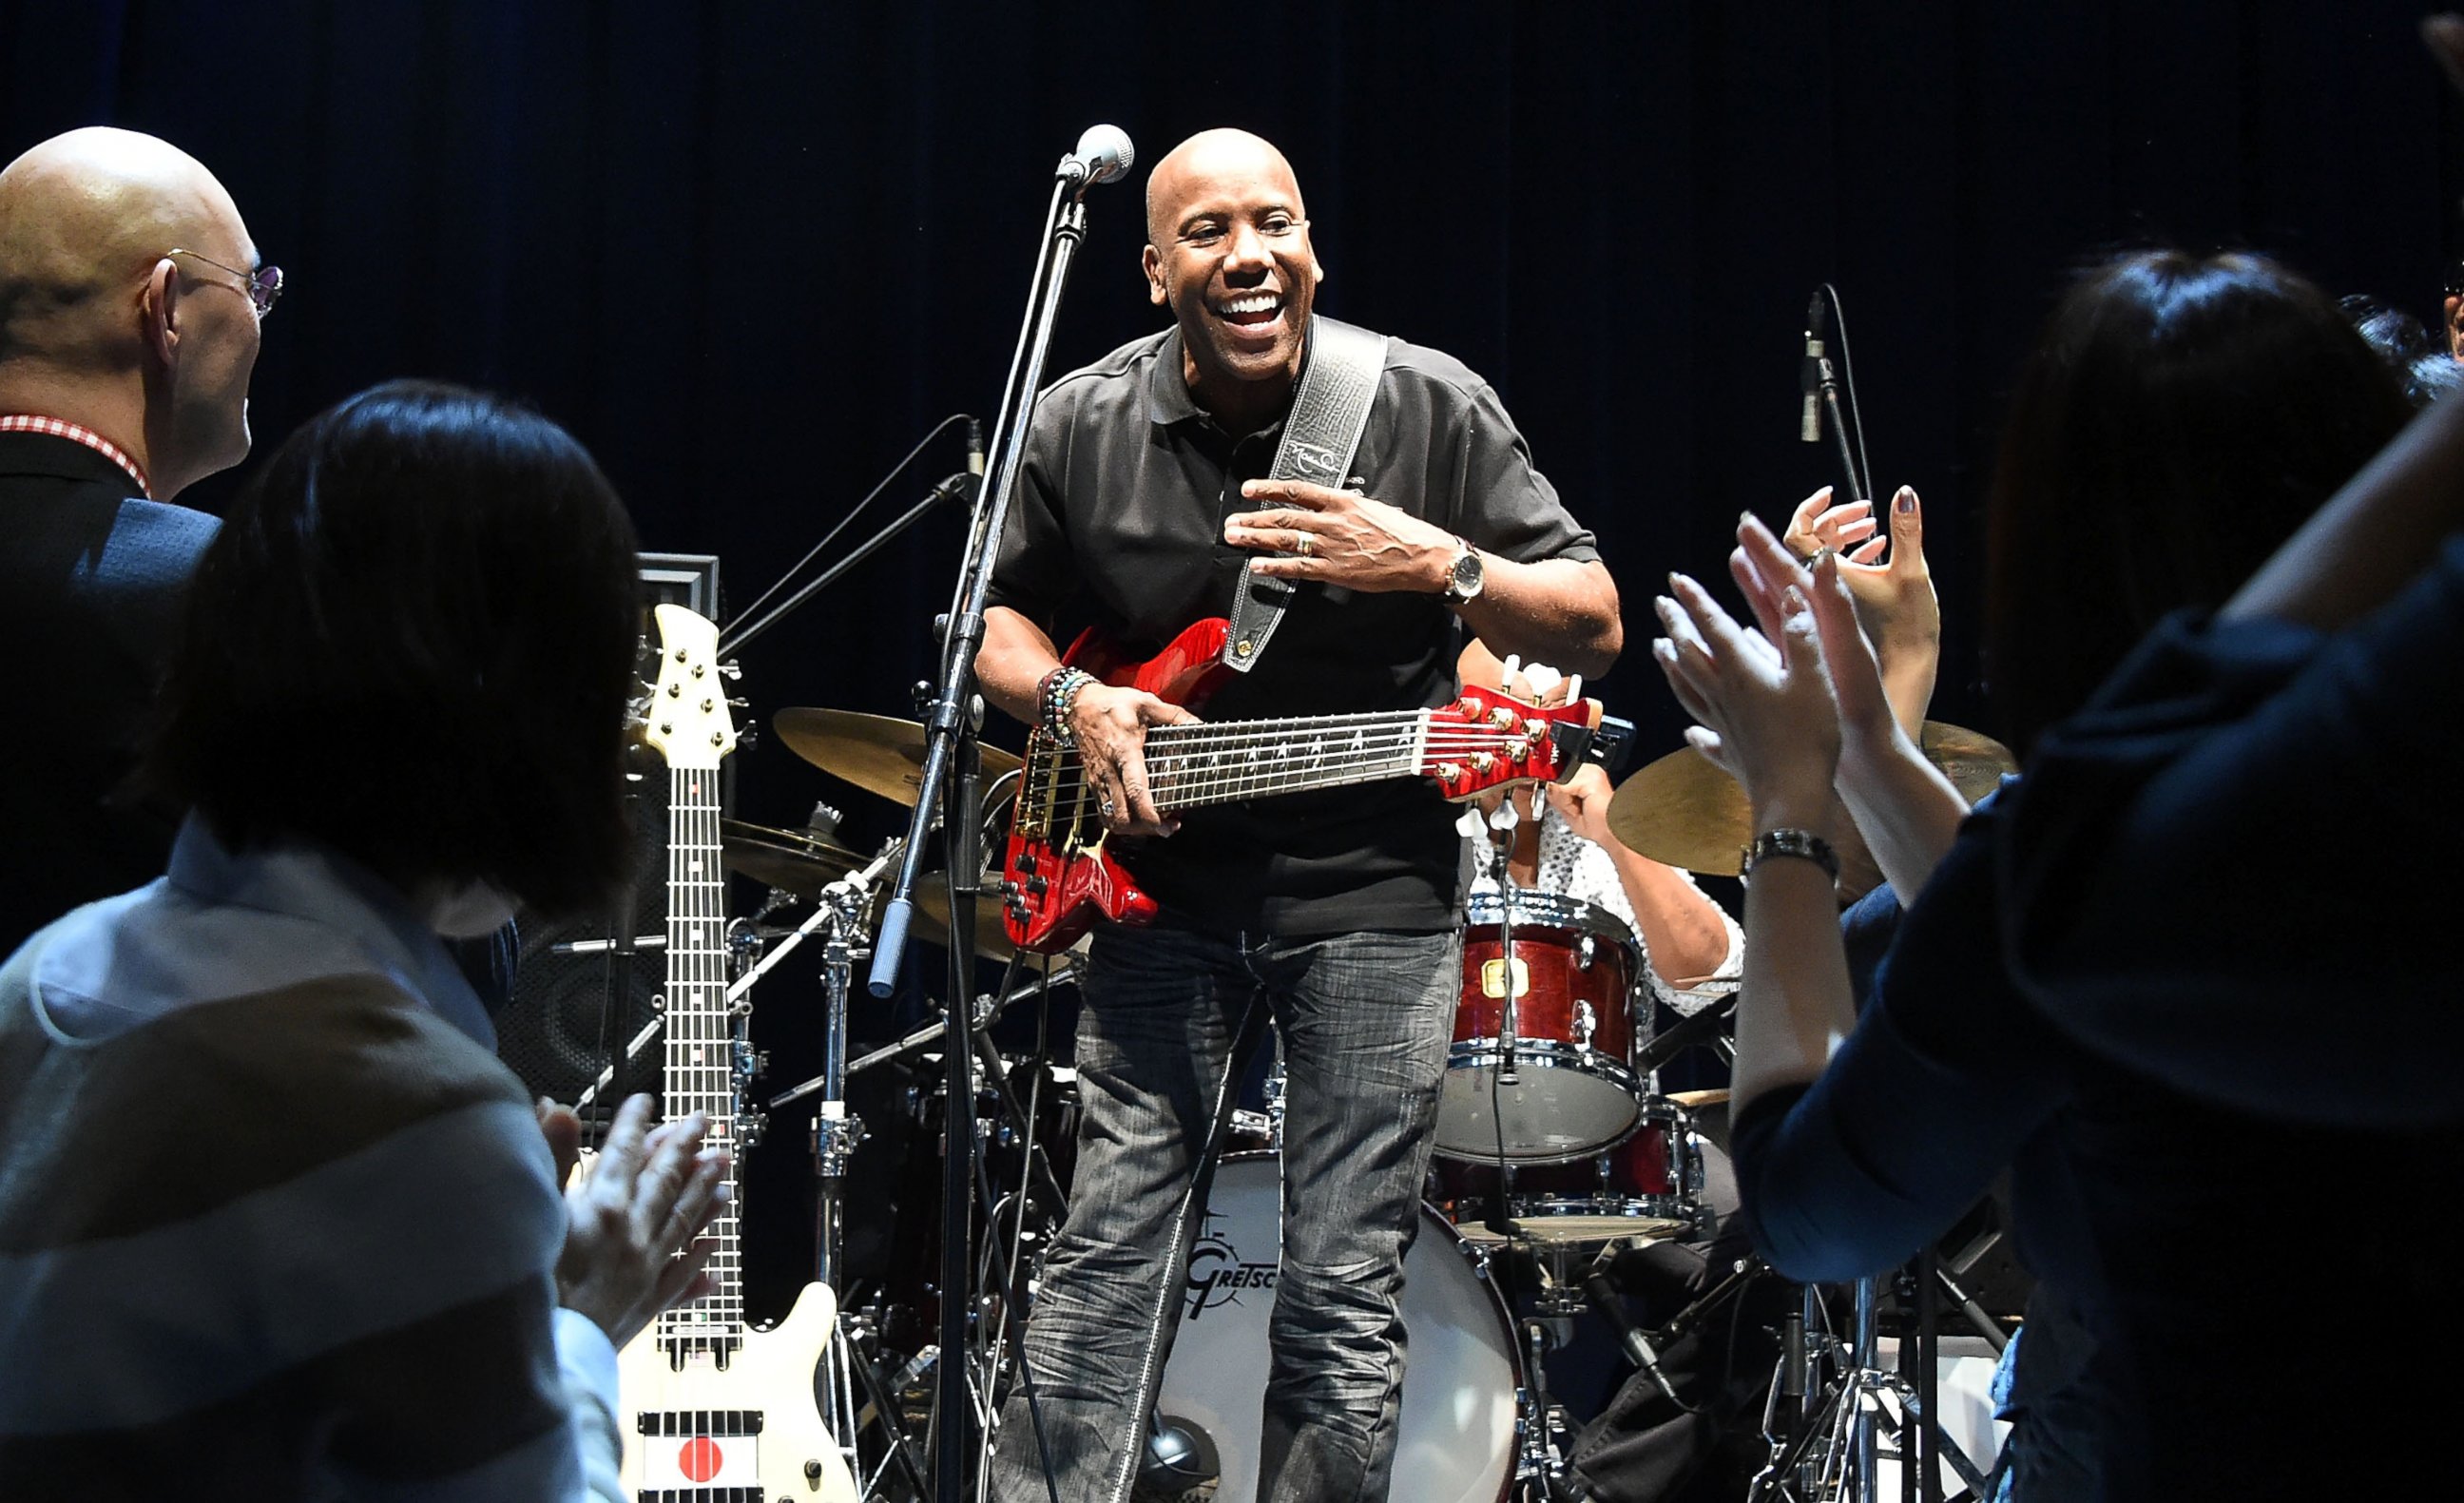 PHOTO: Bassist Nathan East performs on stage during the Nathan East Solo Debut Concert